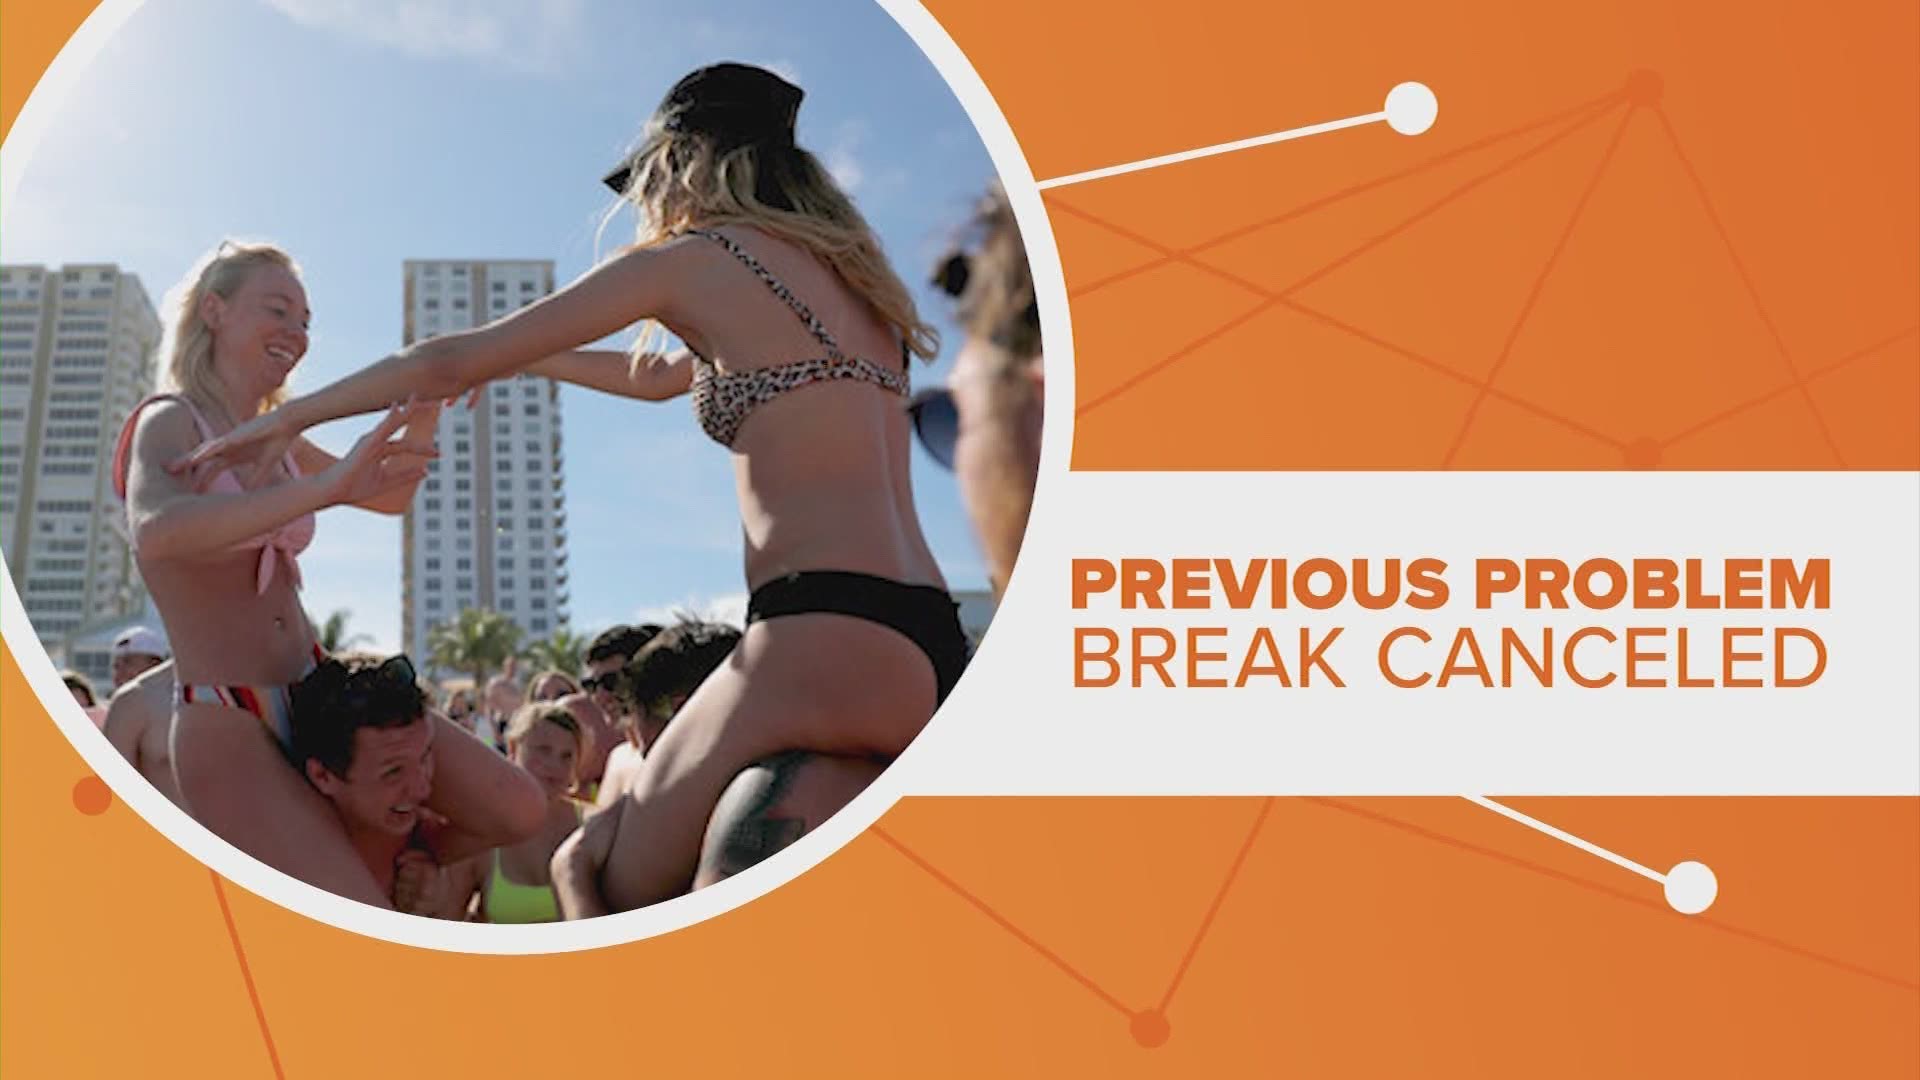 #HTownRush has a look at how colleges are treating spring break during COVID-19 in 2021 vs. 2020.